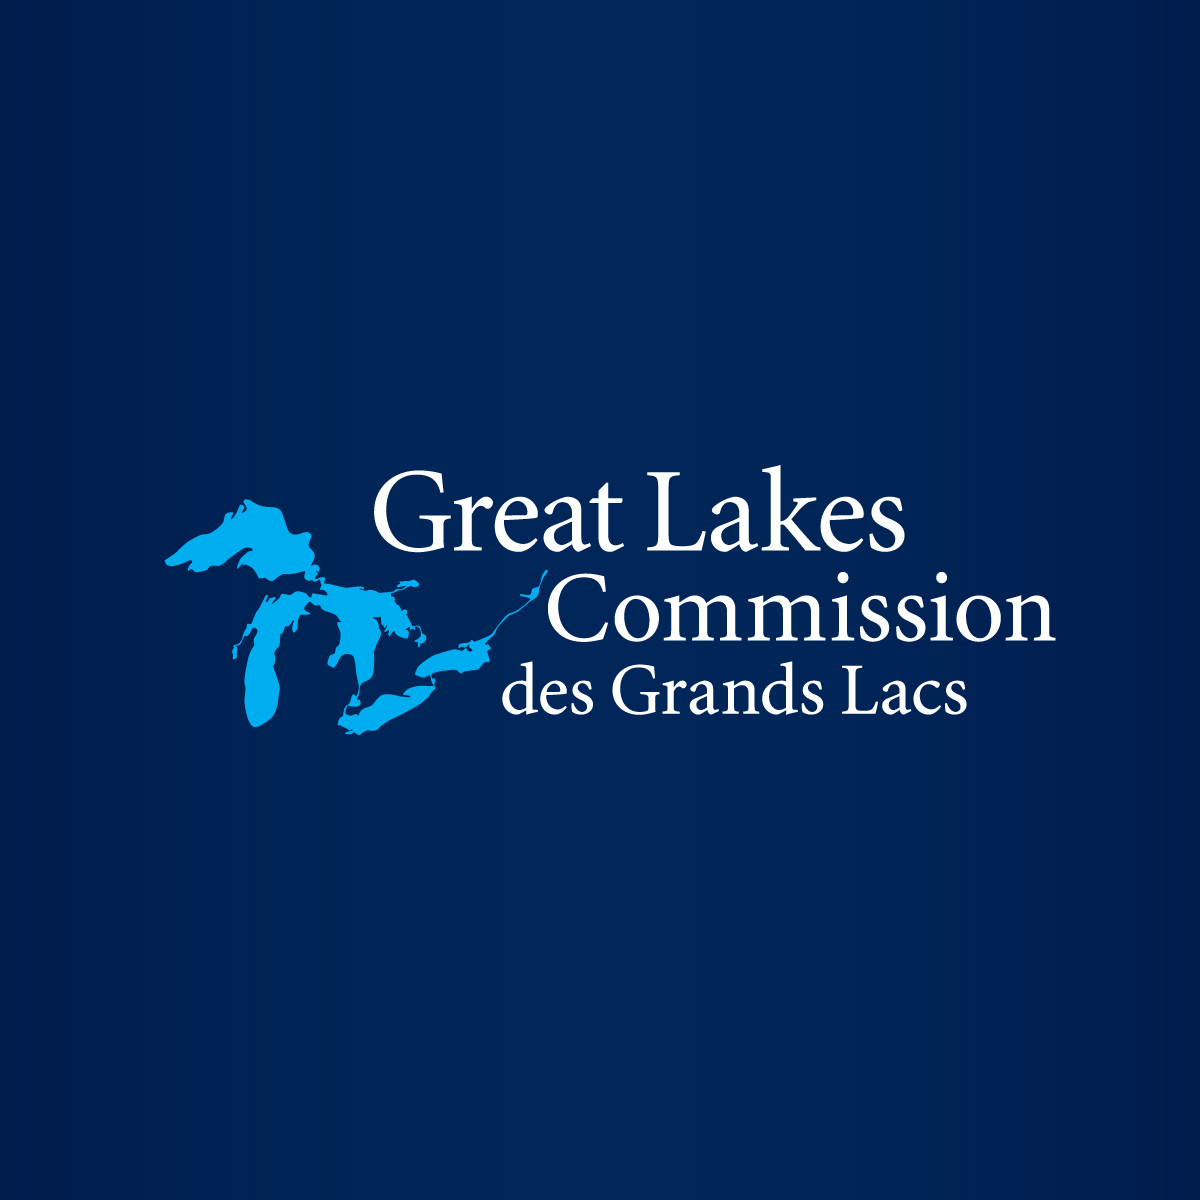 A historic Great Lakes mapping project, right here In Leelanau County